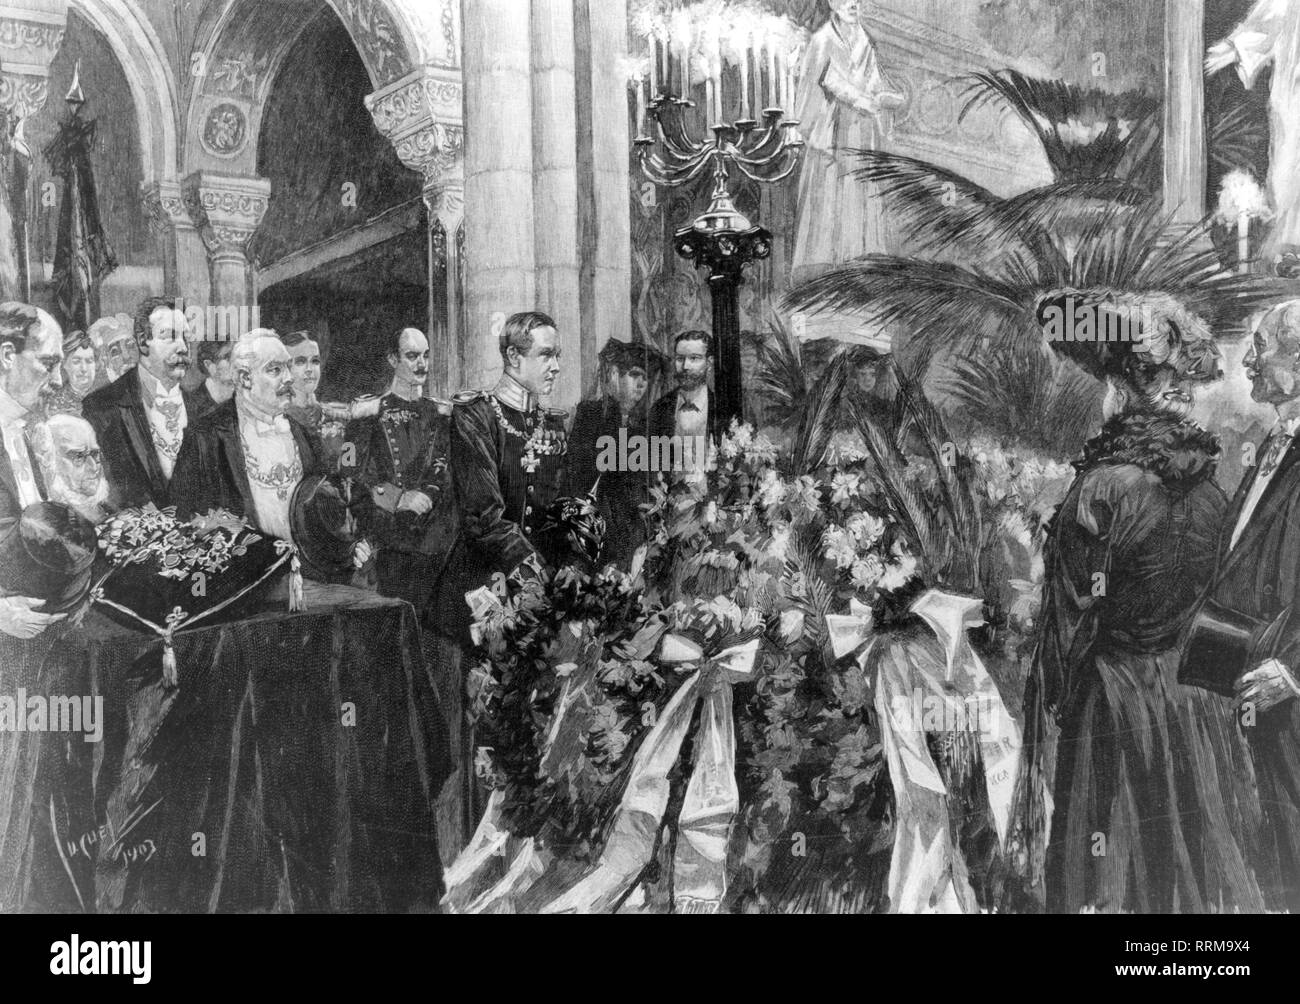 Mommsen, Theodor, 30.11.1817 - 1.11.1903, German historian, death, funeral service in the Kaiser Wilhelm Memorial Church, Berlin, November 1903, Additional-Rights-Clearance-Info-Not-Available Stock Photo